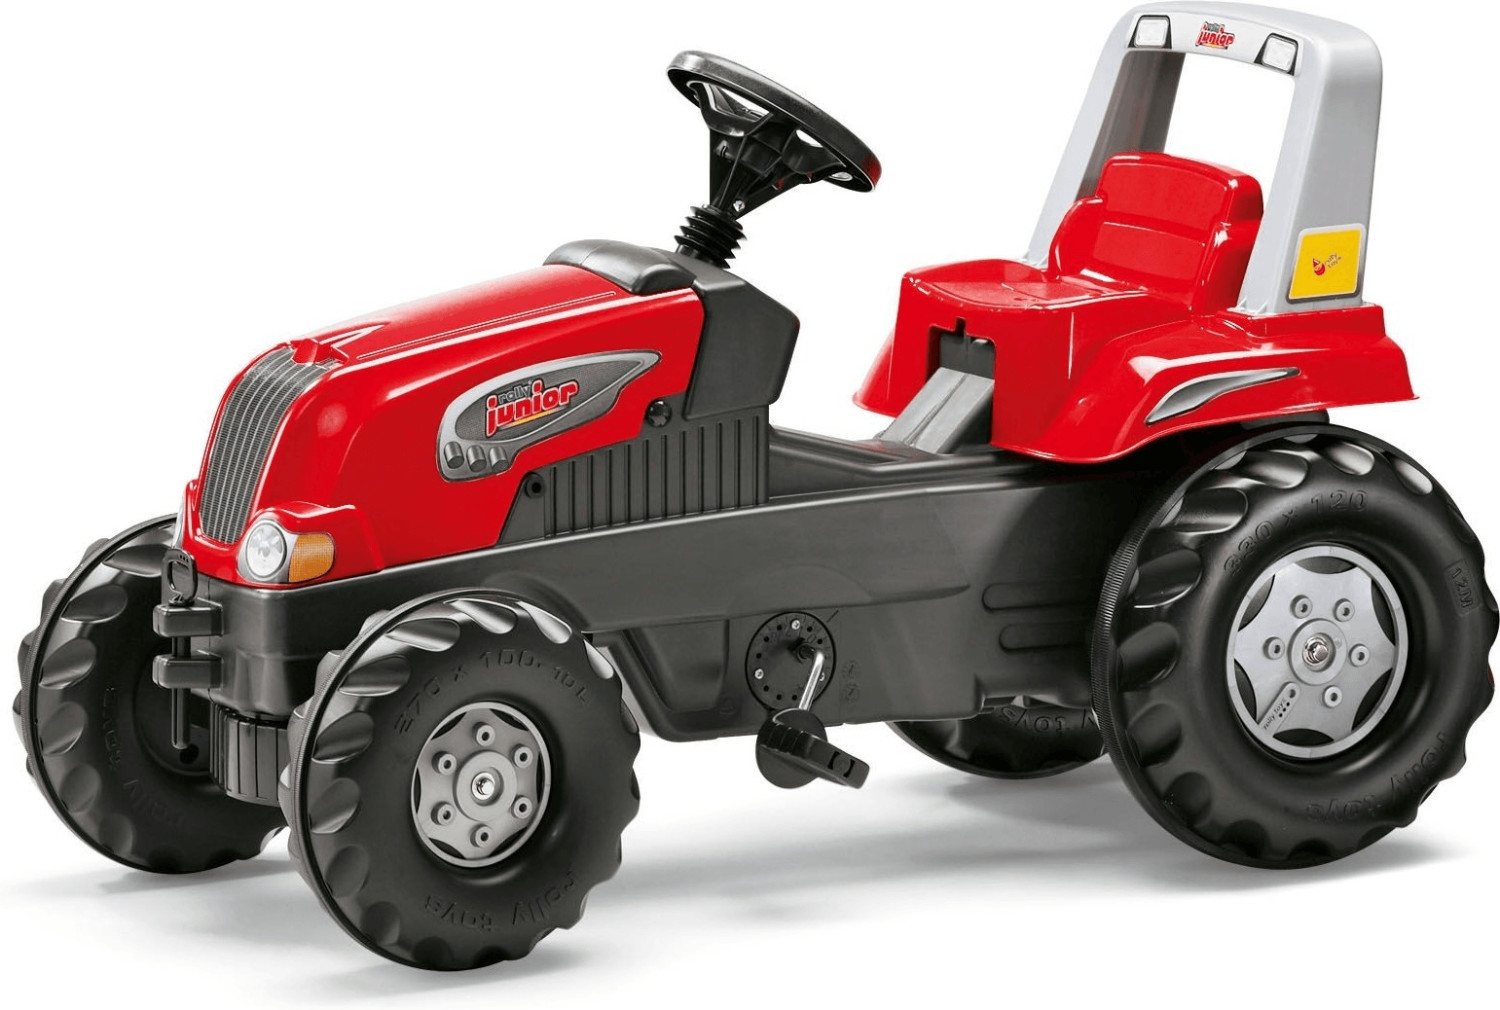 Rolly Toys rollyJunior RT Tractor red